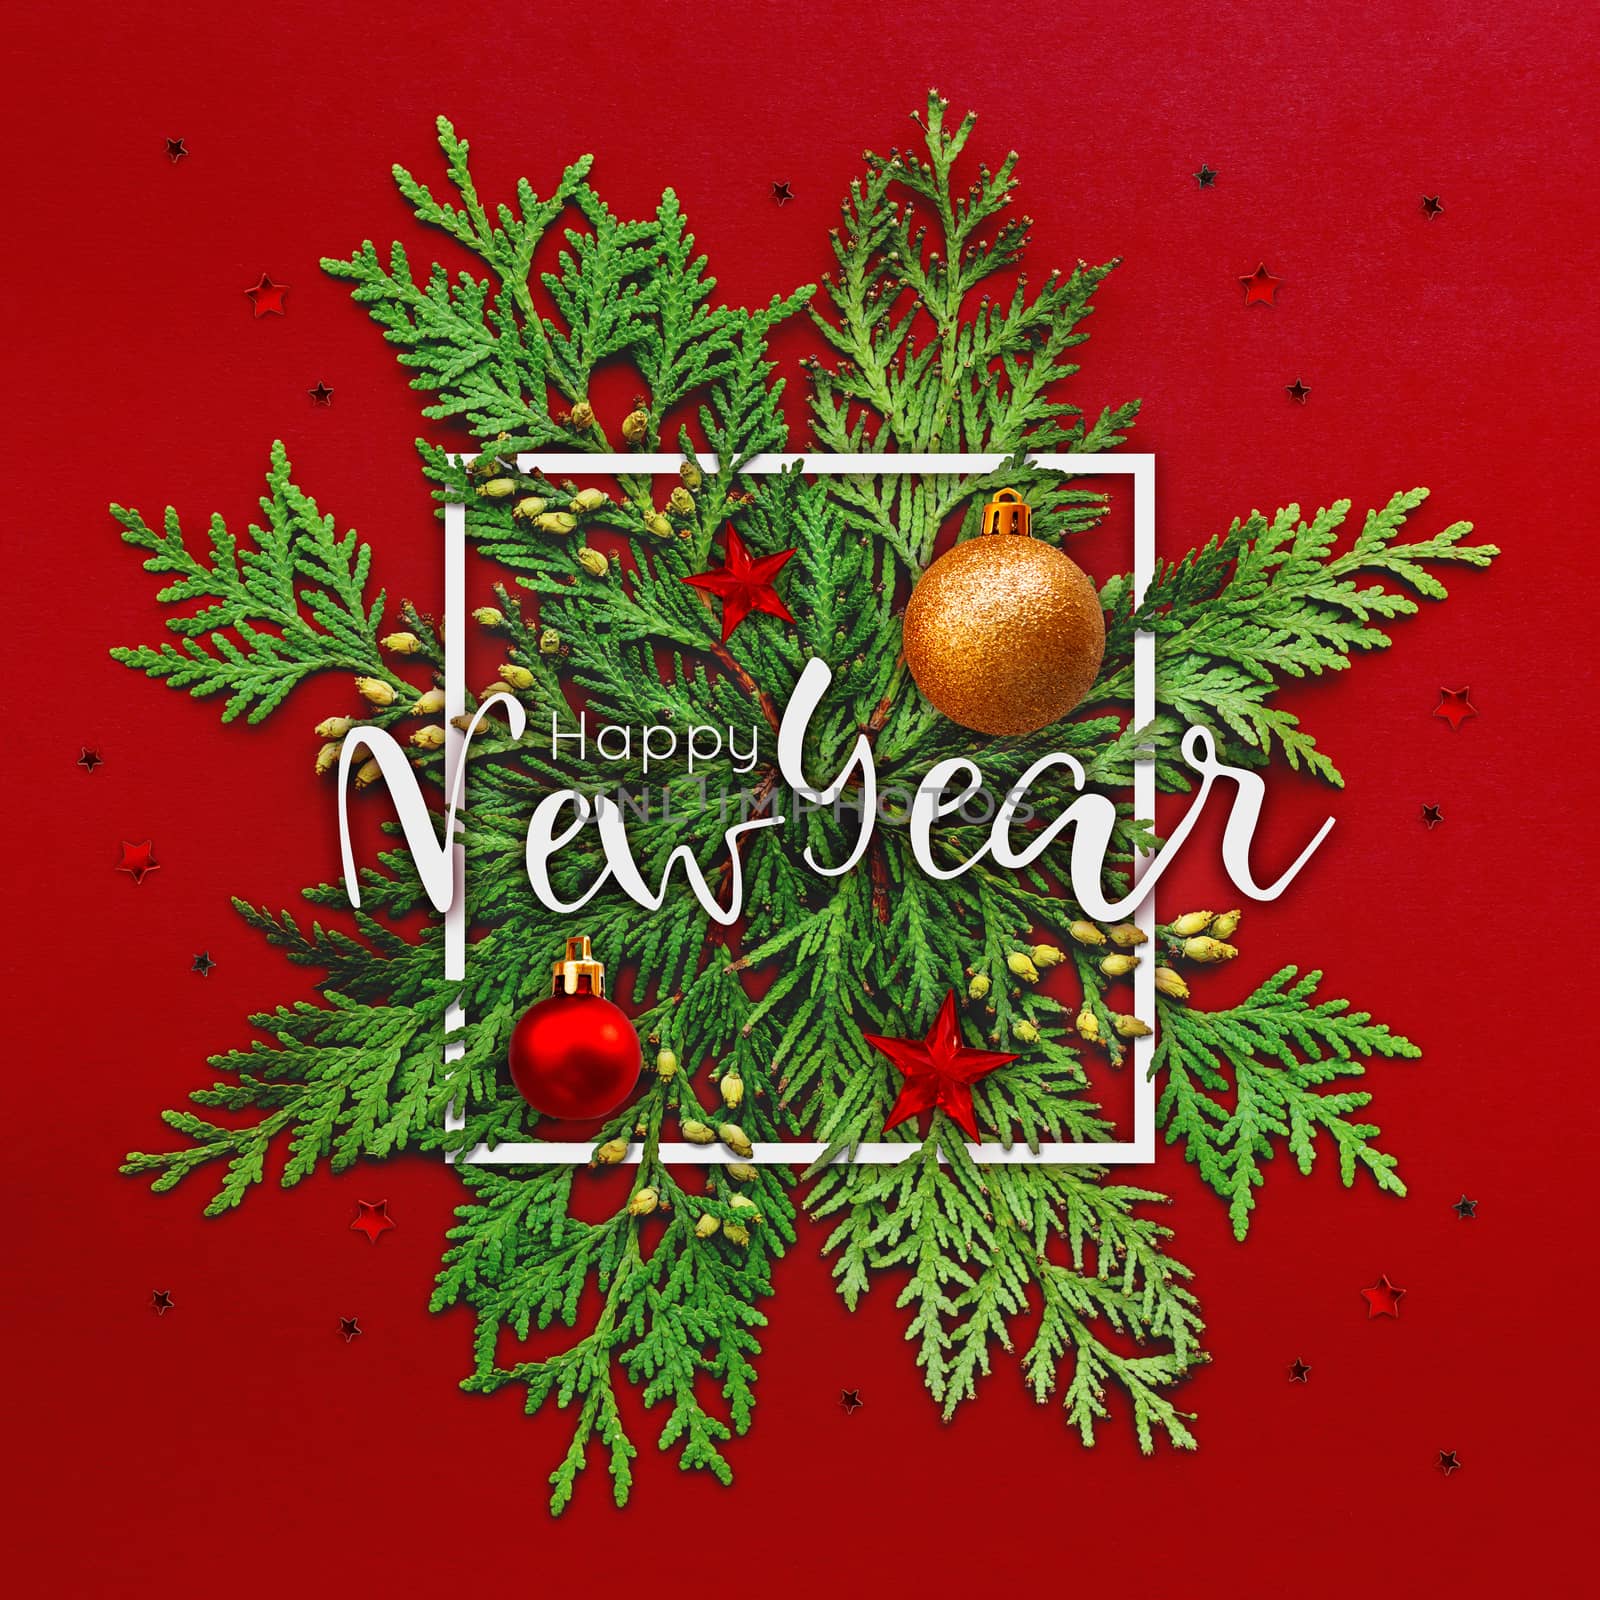 Christmas background with thuja branches and words HAPPY NEW YEAR in white square frame. Trendy Xmas greeting with stars and ball decorations on red backdrop.